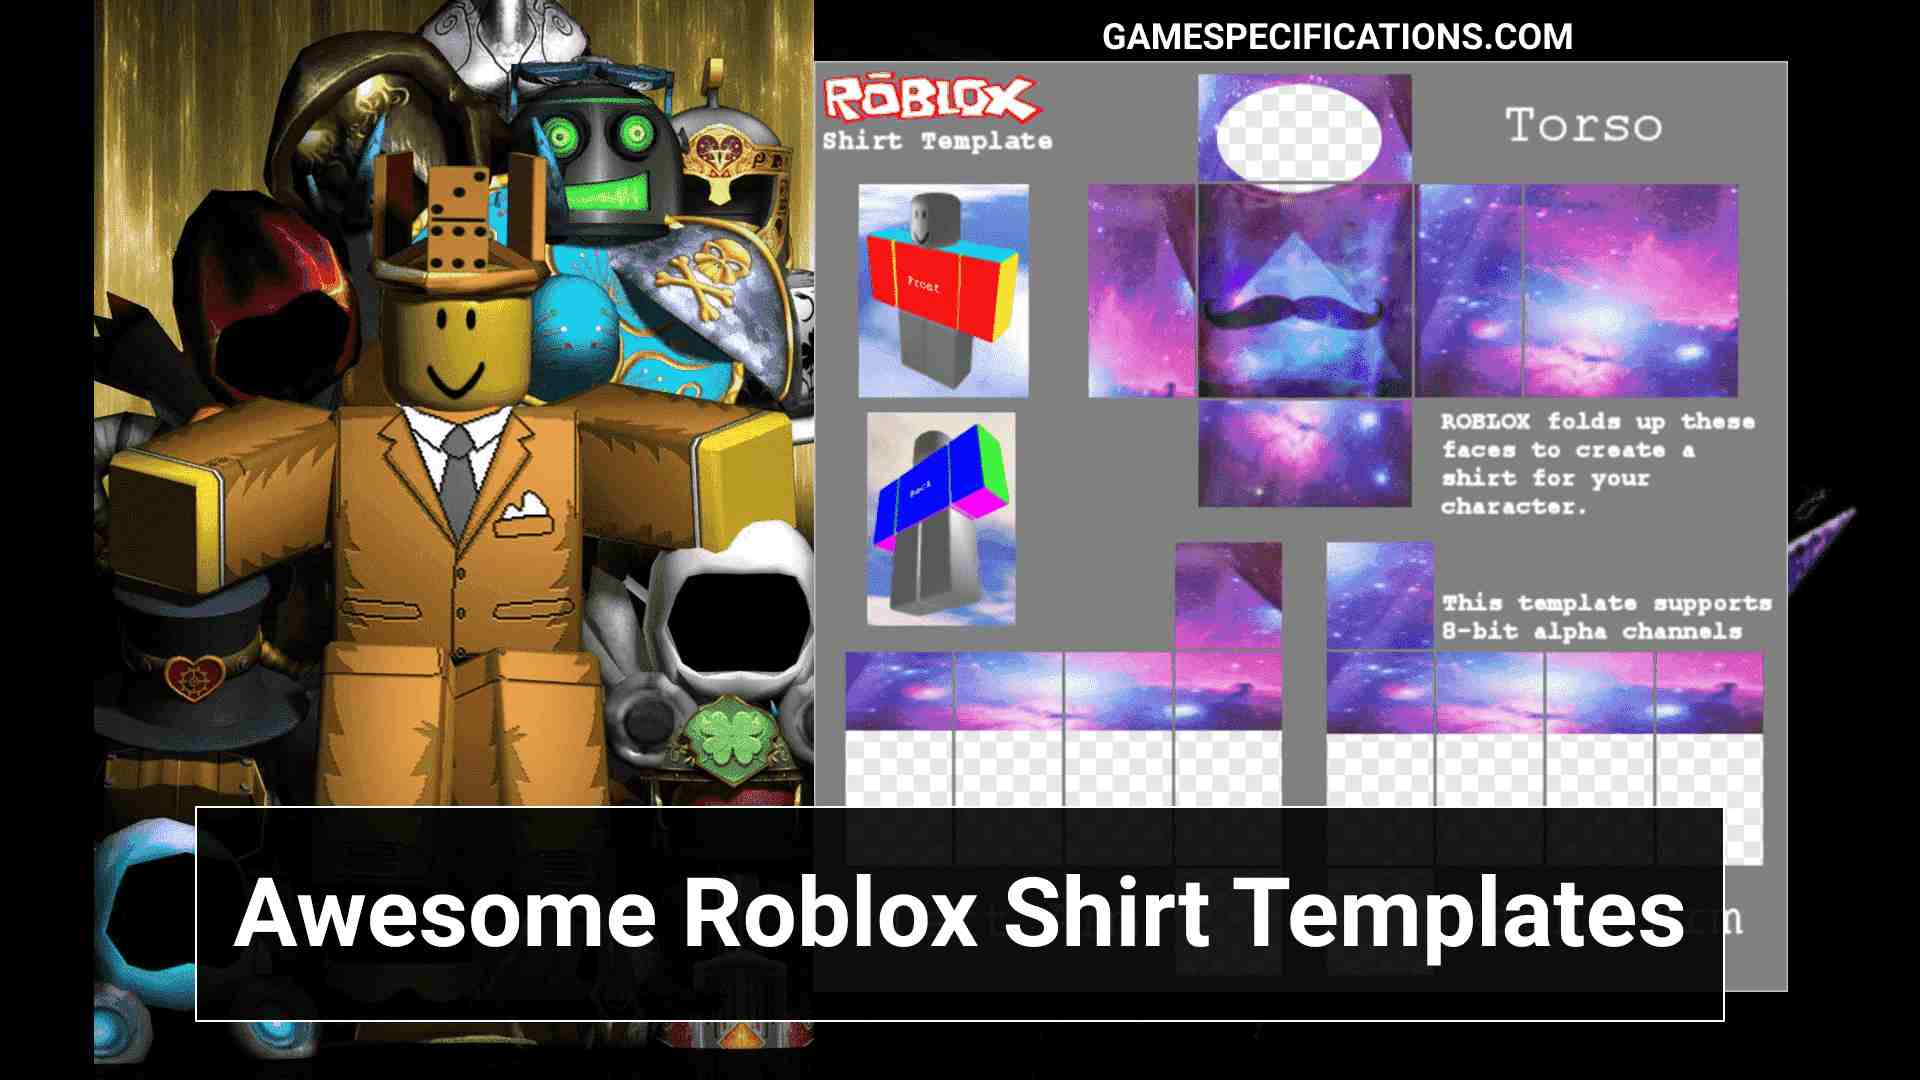 25 Coolest Roblox Shirt Templates Proved To Be The Best Game Specifications - awesome free roblox shirt templates